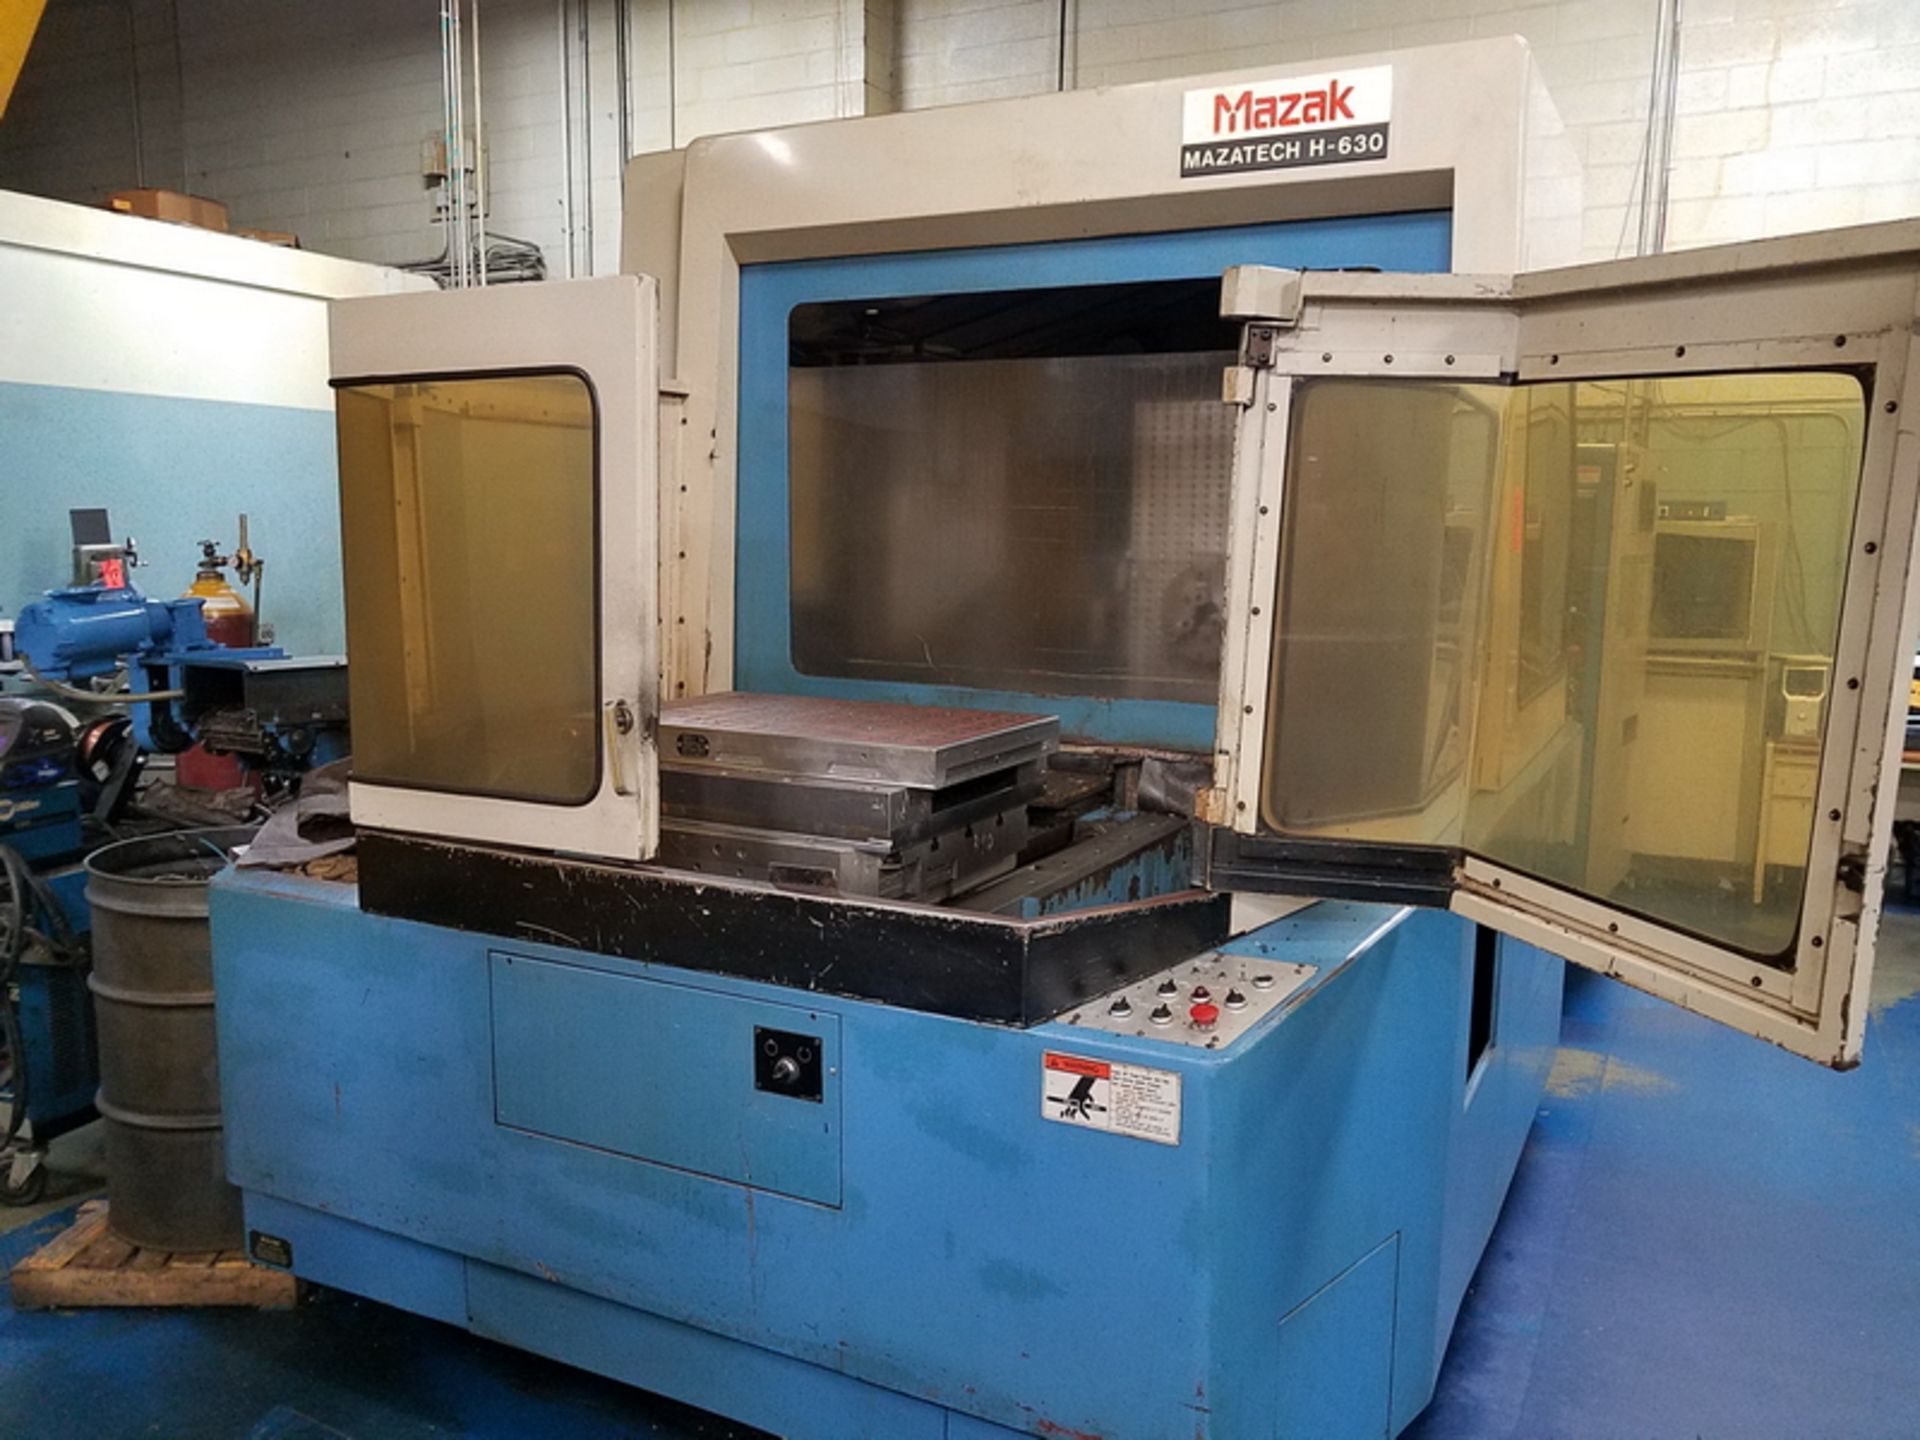 Mazak 3-Axis Model H-630 CNC Horizontal Machining Center, S/N: 78498 (1989); with 40-Position - Image 9 of 13